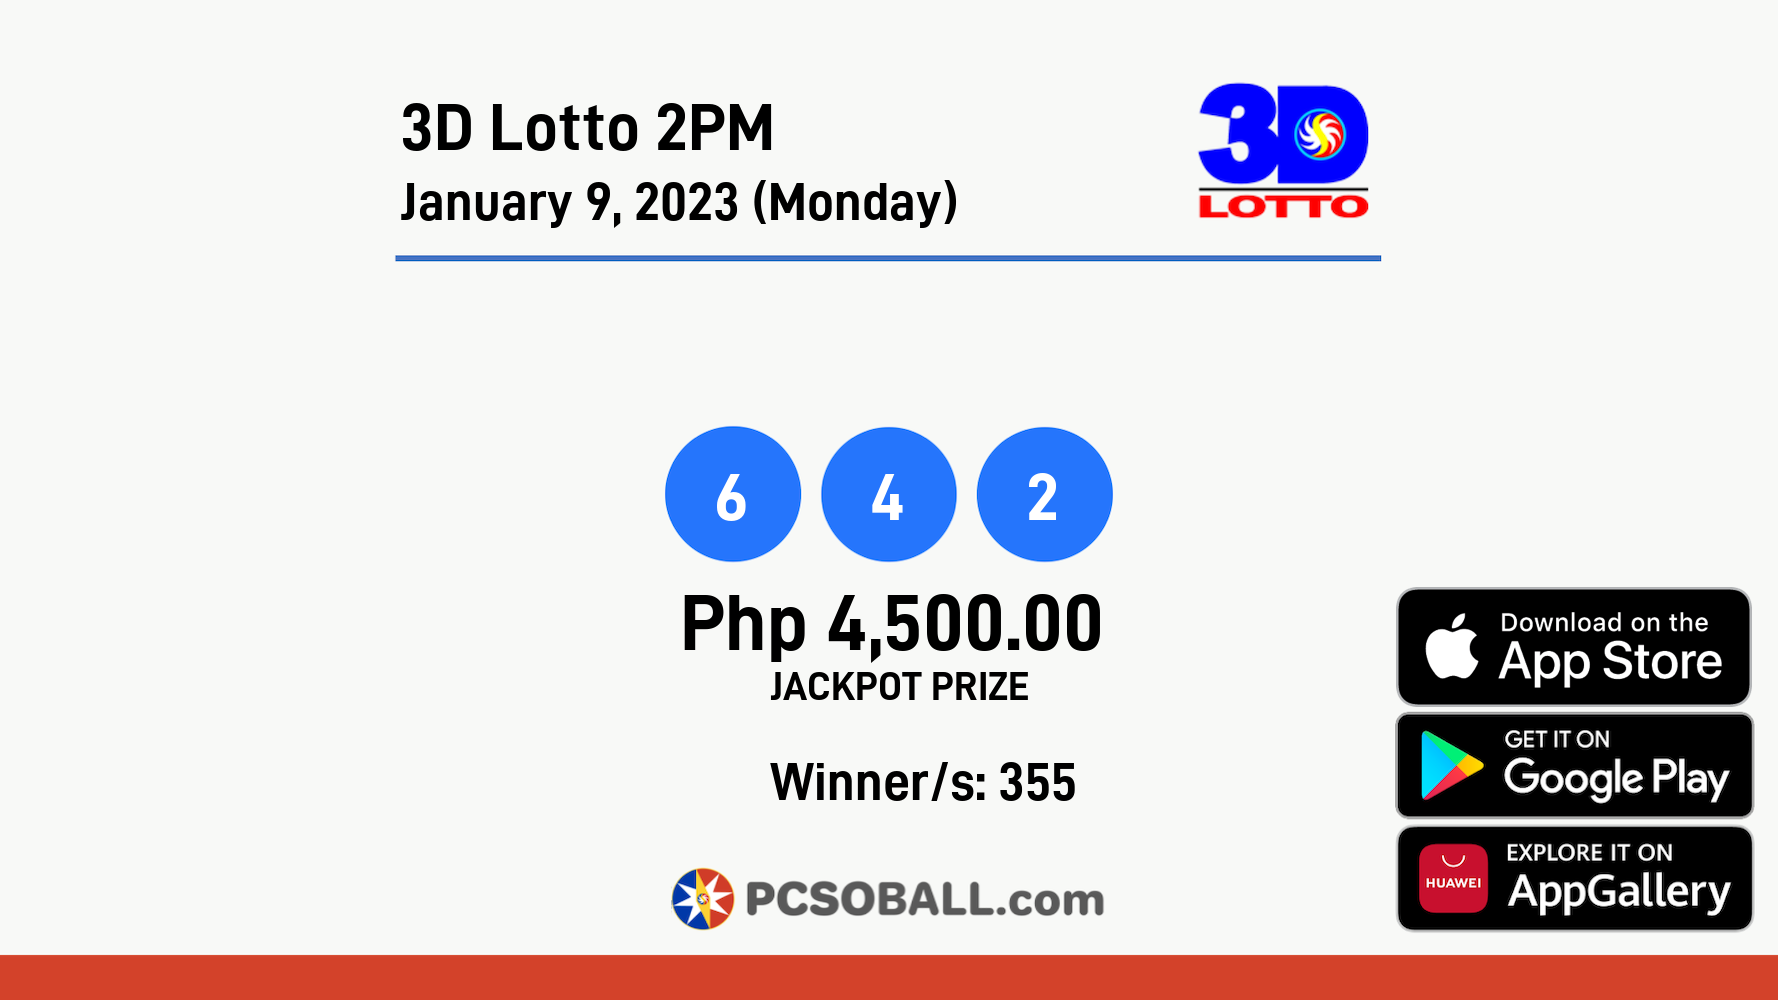 3D Lotto 2PM January 9, 2023 (Monday) Result